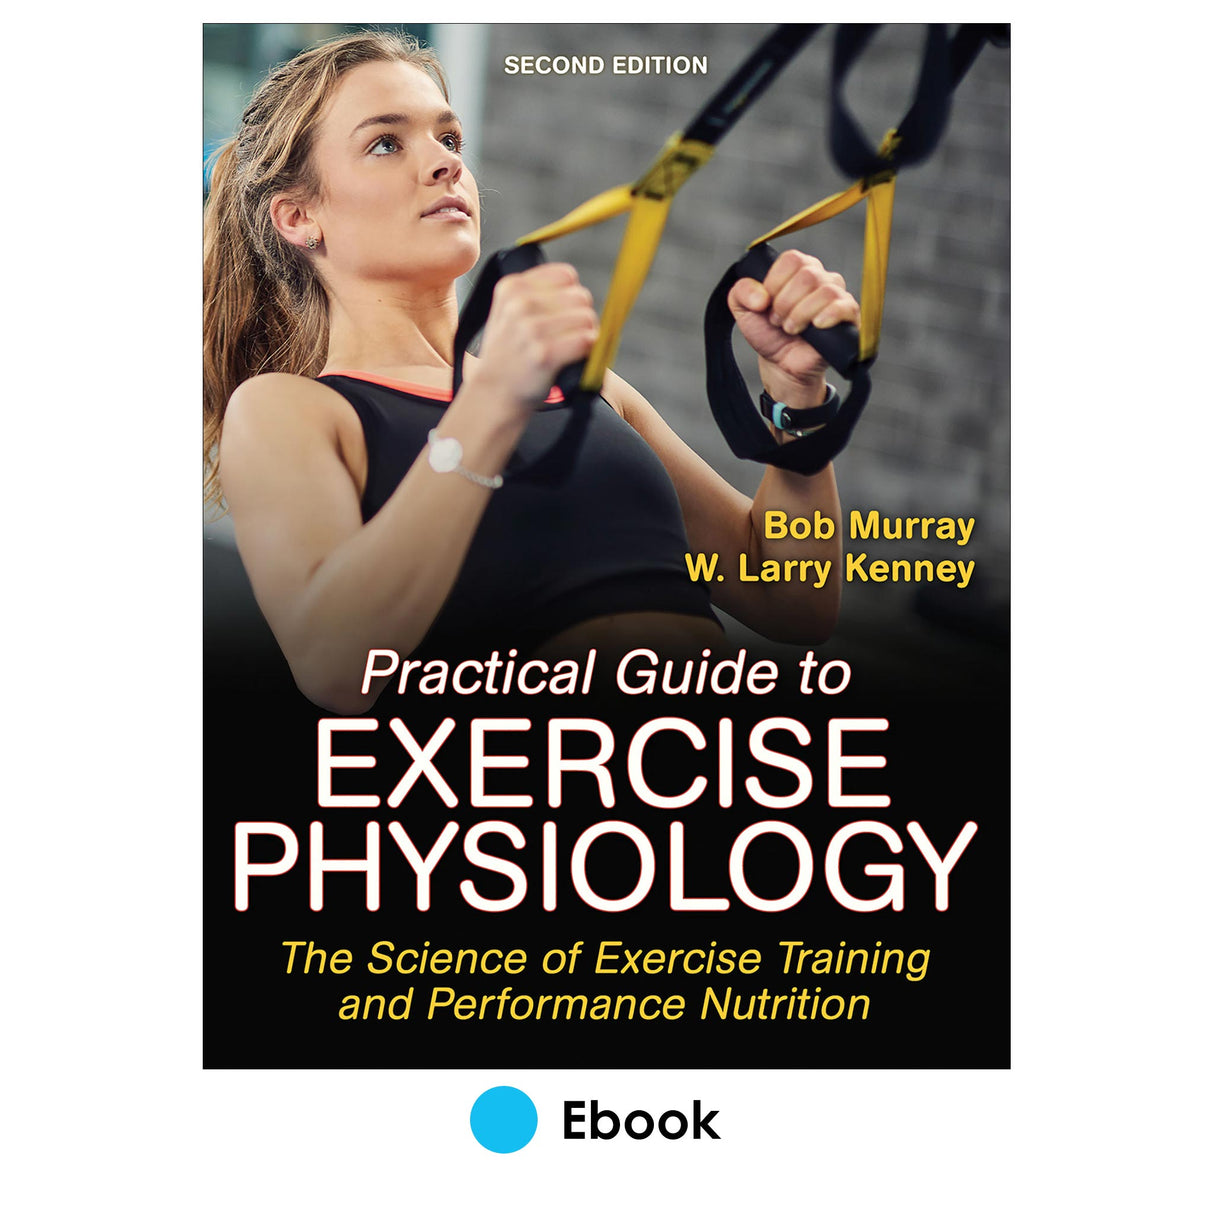 Practical Guide to Exercise Physiology 2nd Edition epub